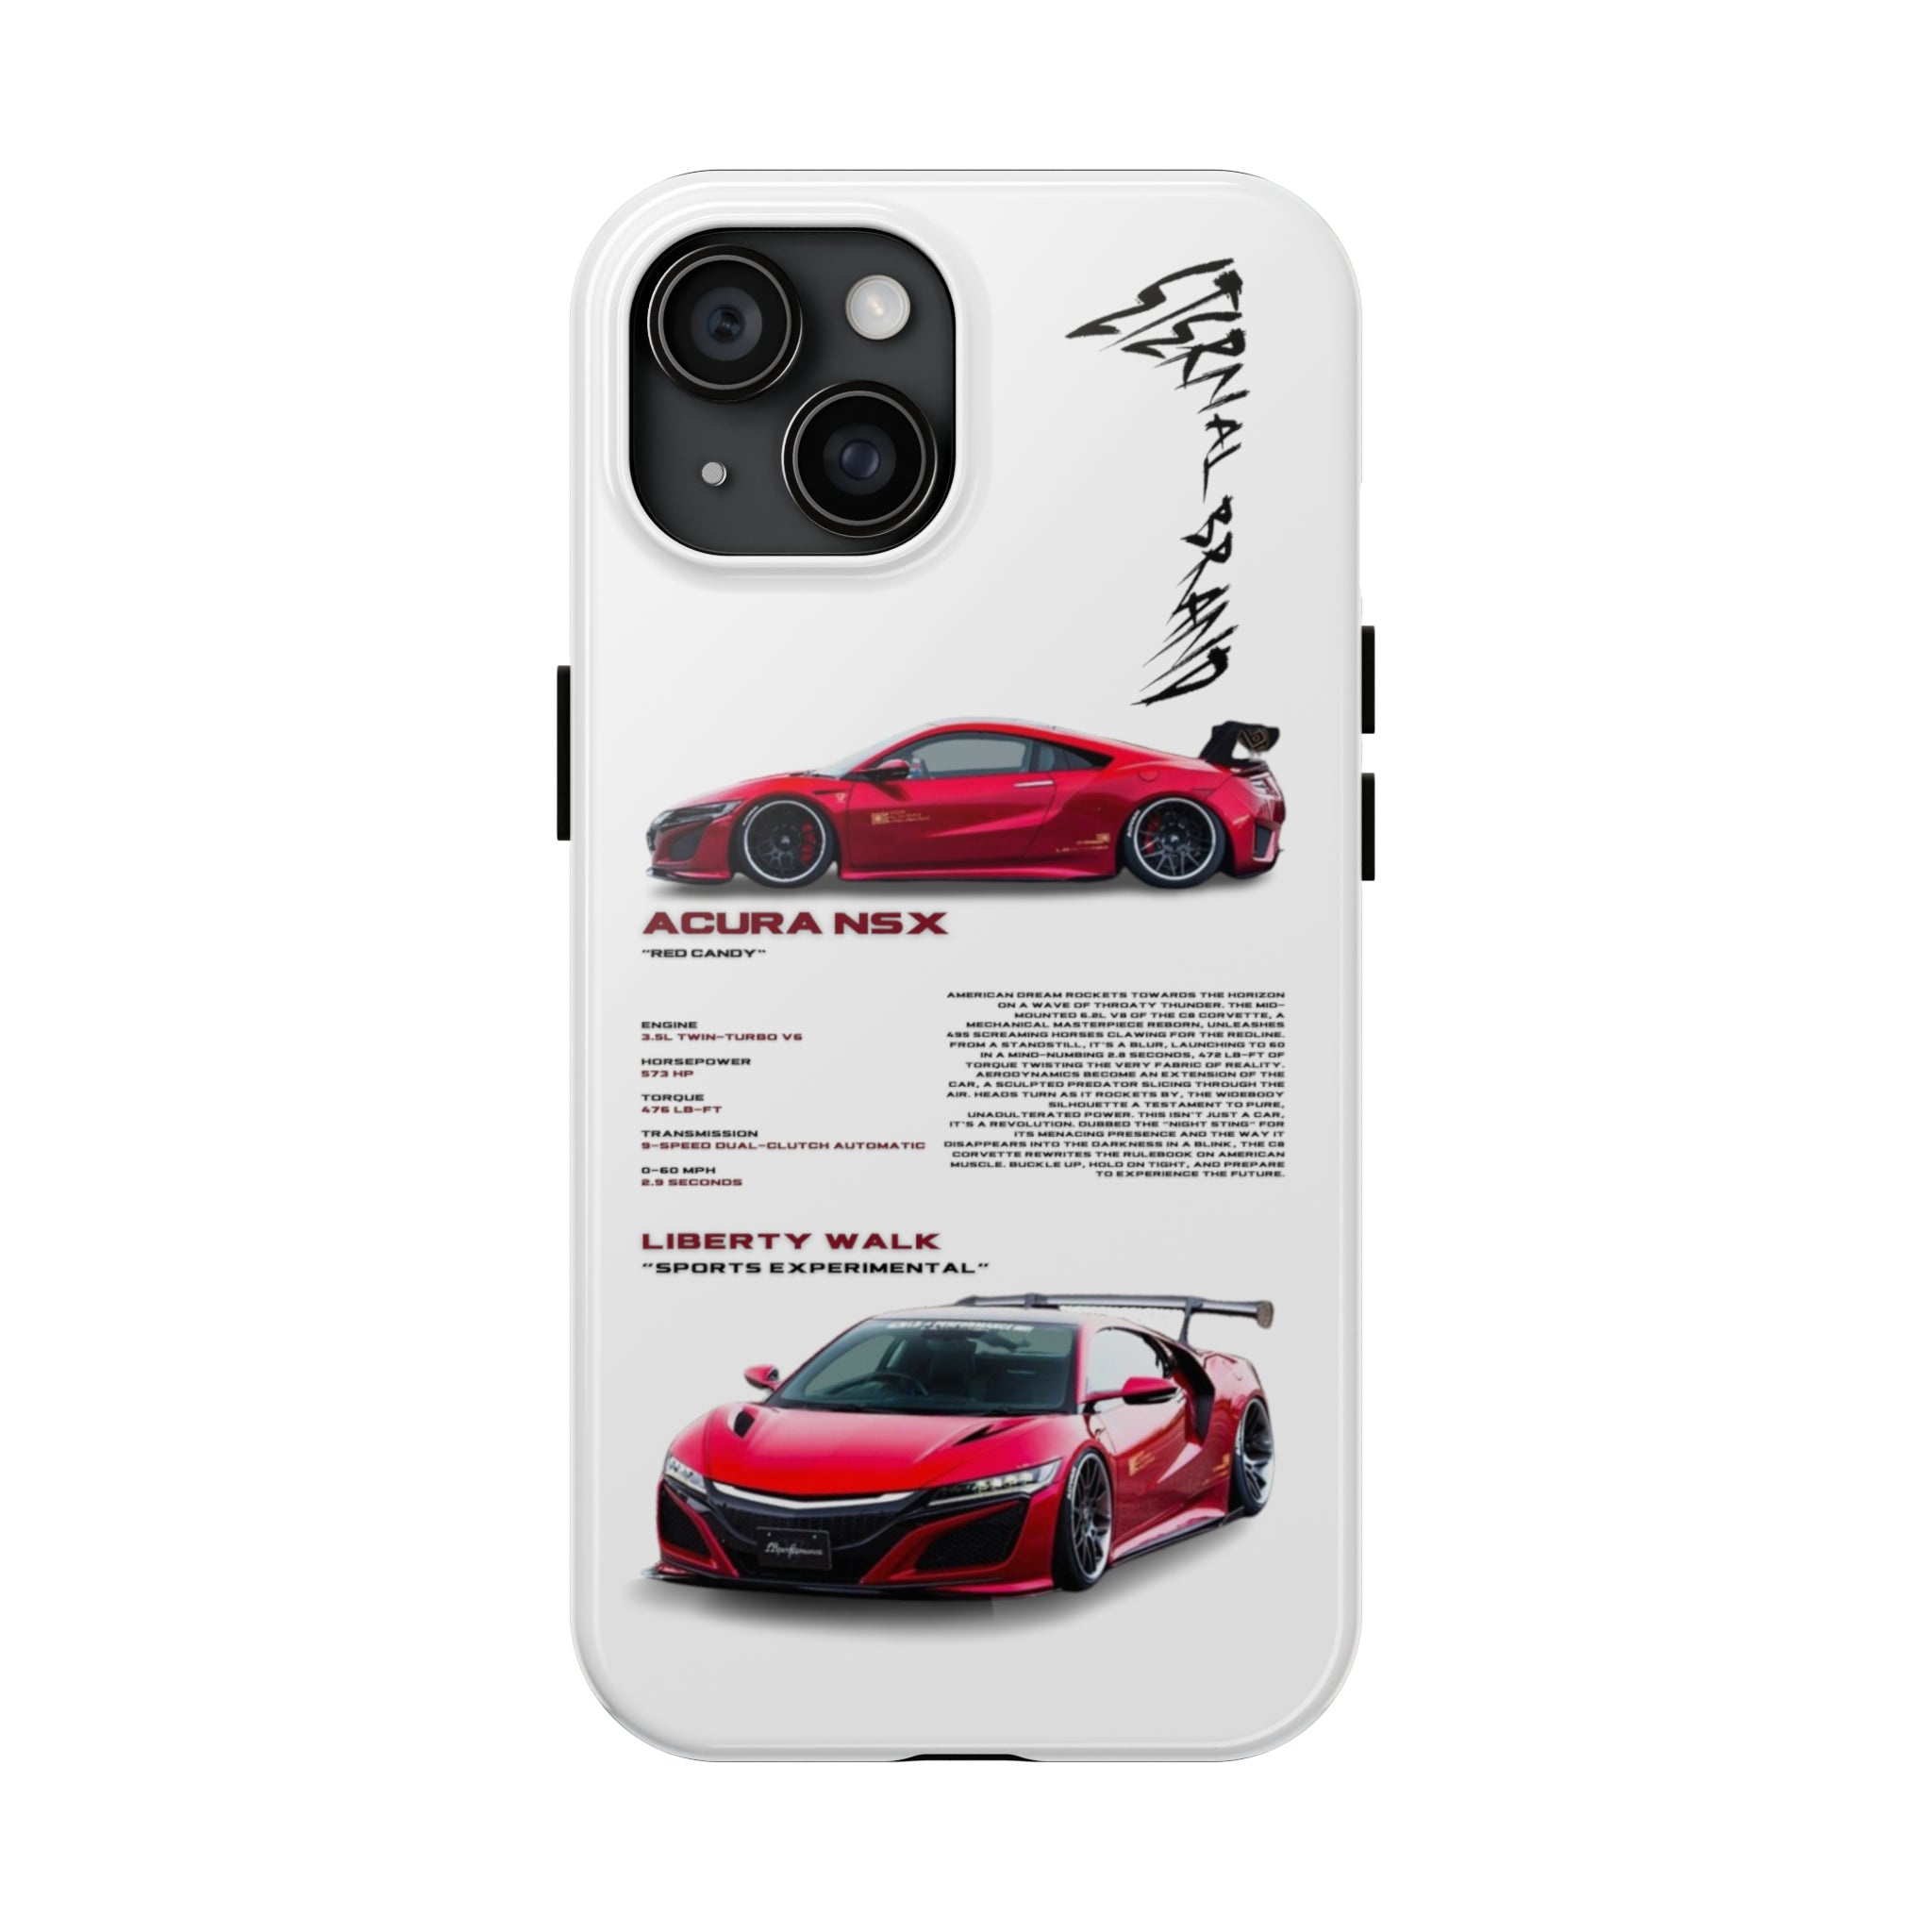 Acura NSX "Candy Red"